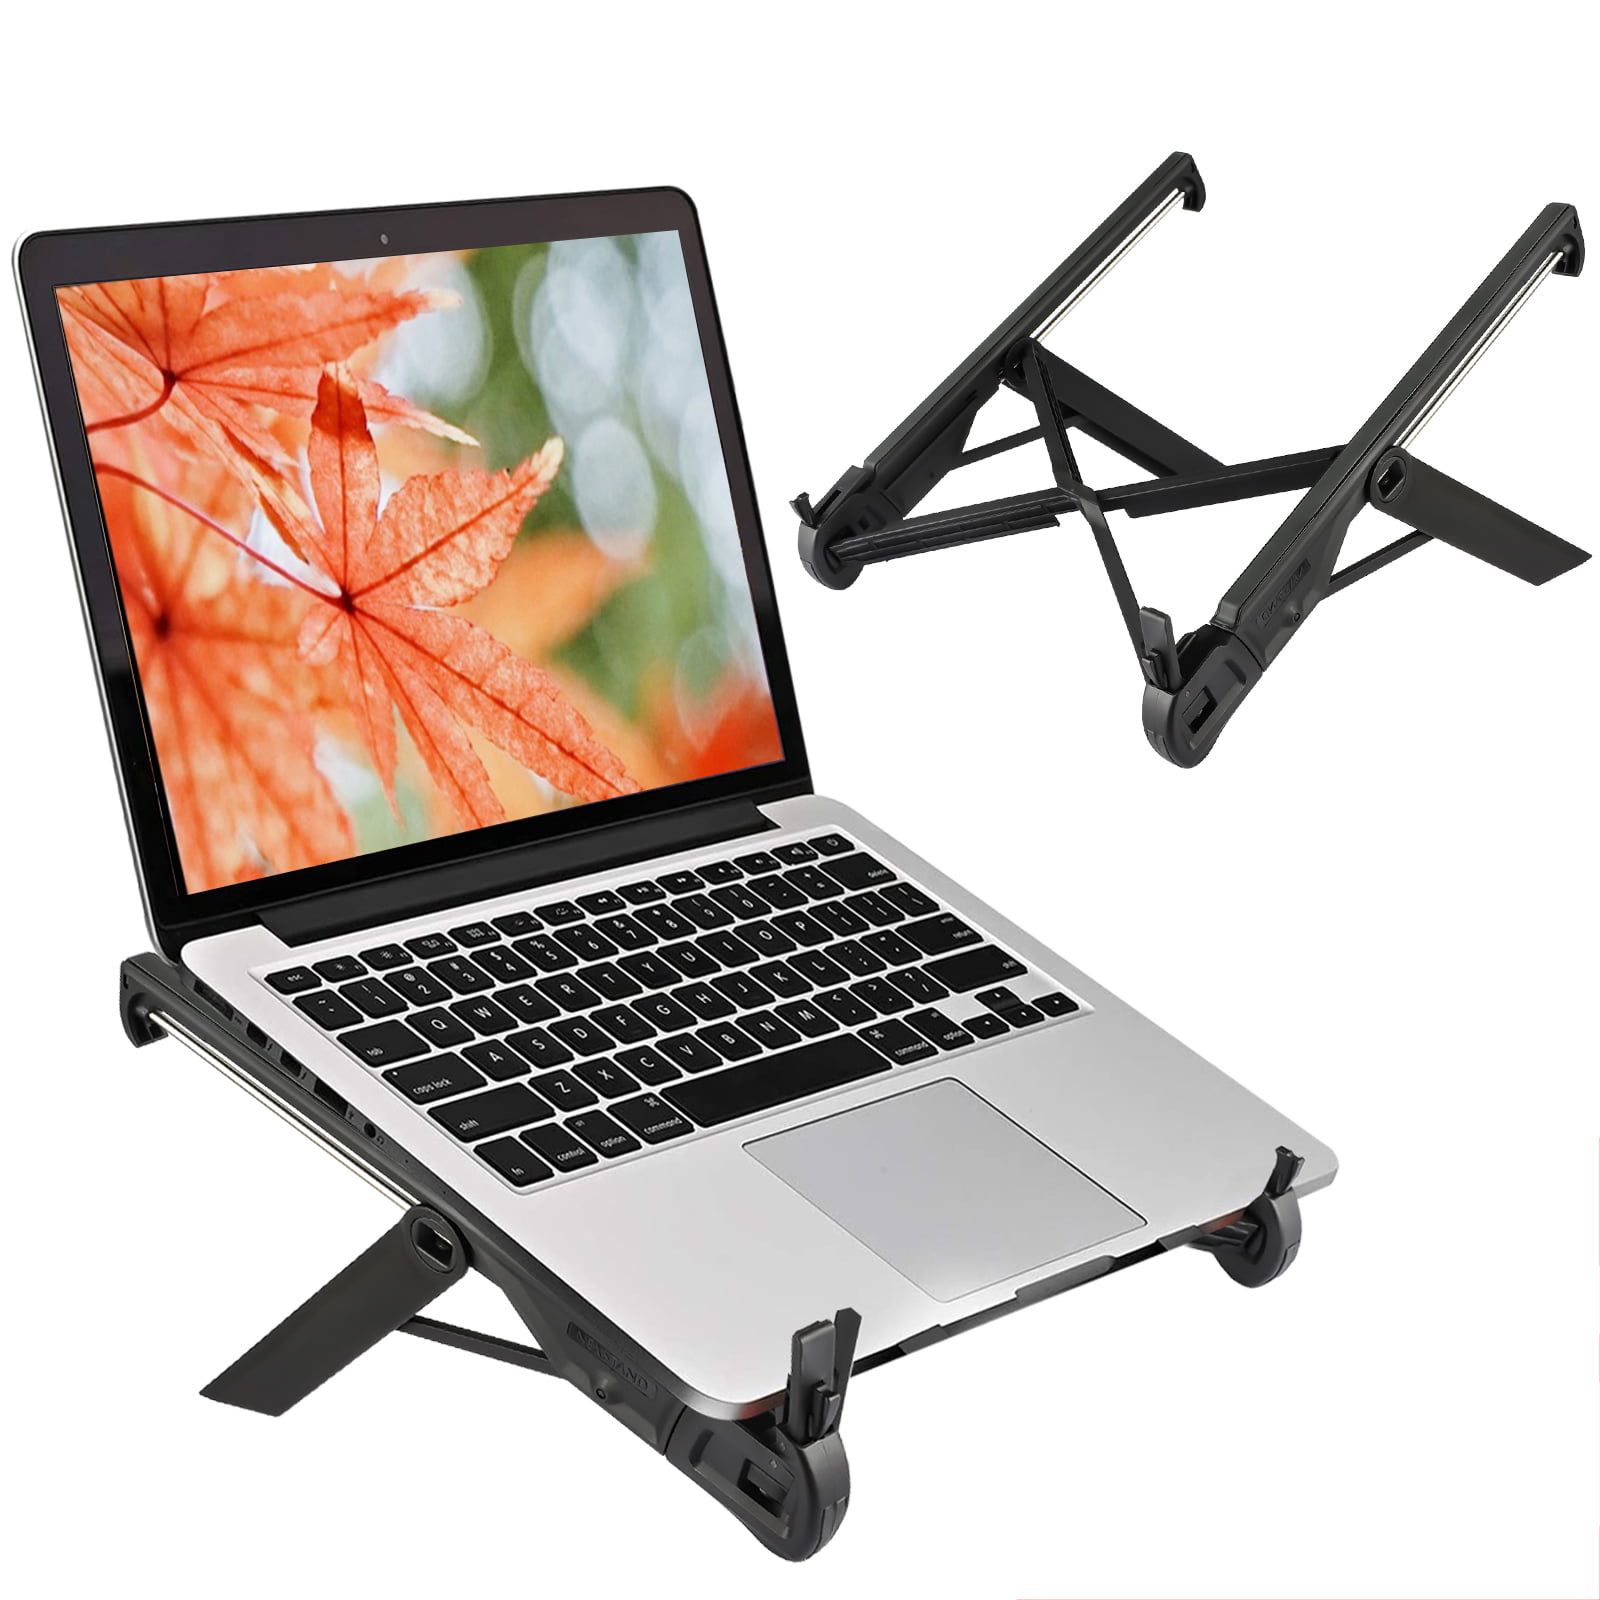 Support up to 17 inches Adjustable Laptop Stand for Desk Portable Ventilated Desktop Computer Laptop Holder Riser for Foldable Notebook Stand Pink 